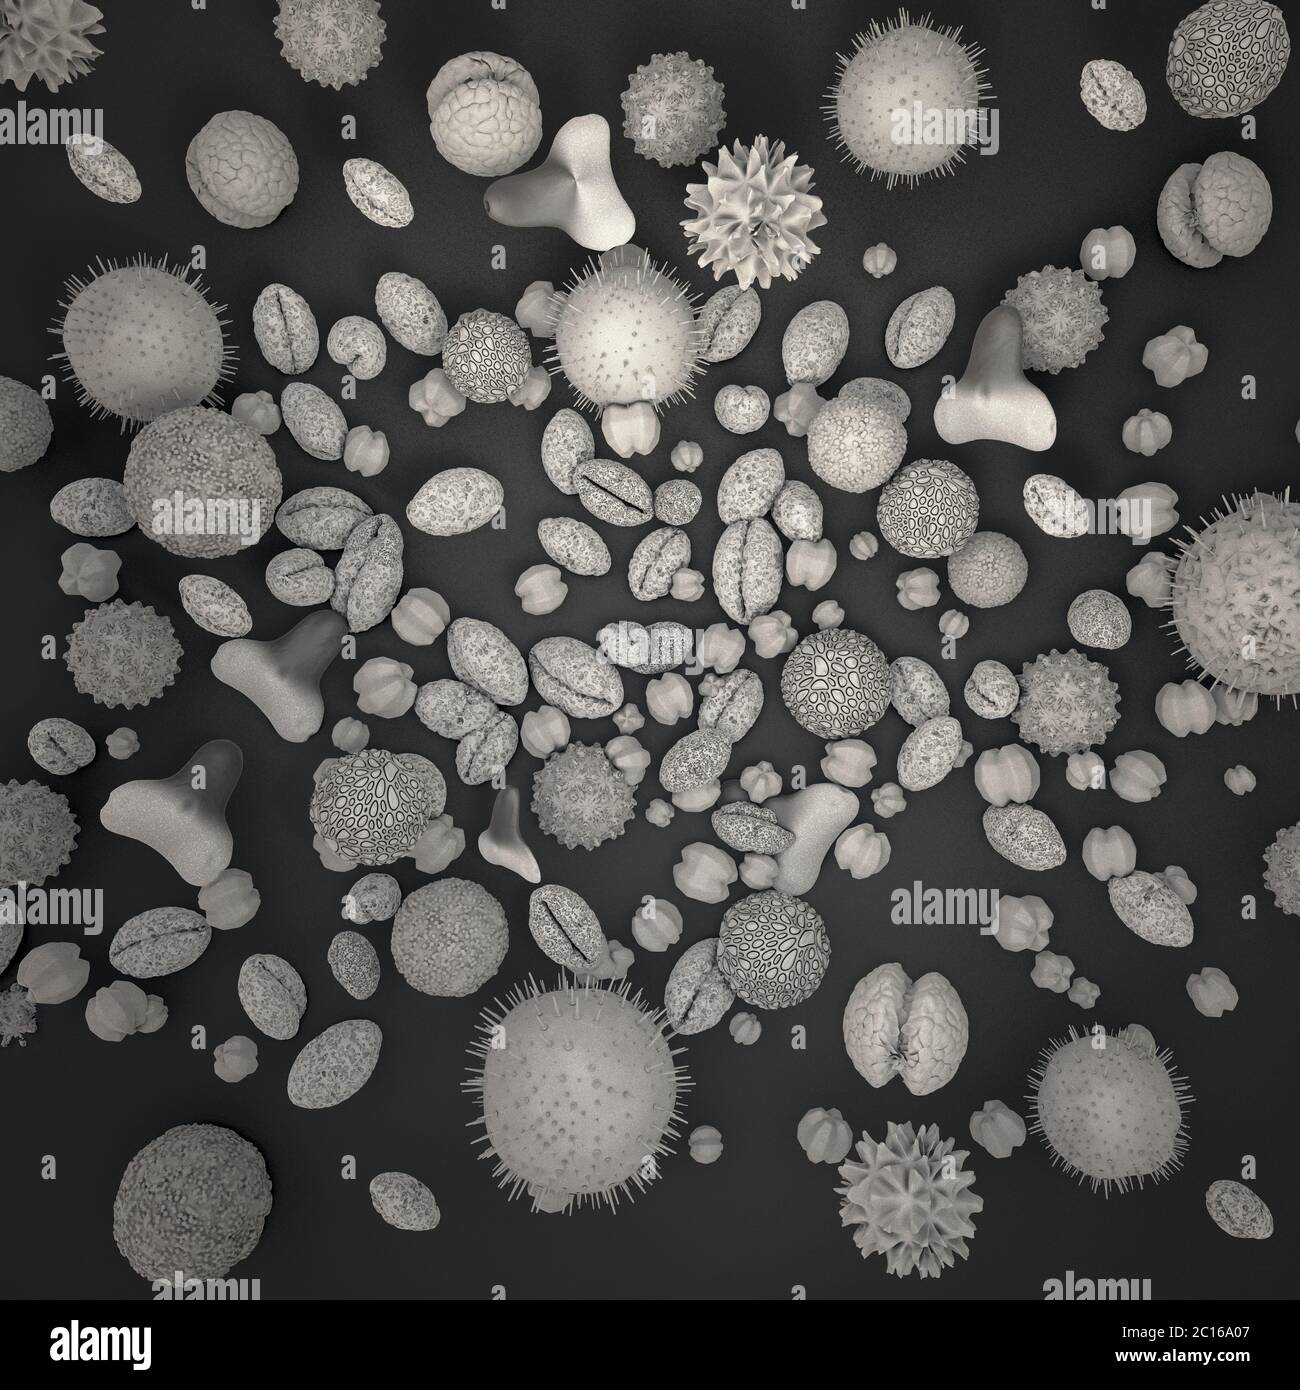 3d illustration of many different pollen bodies in black and white Stock Photo